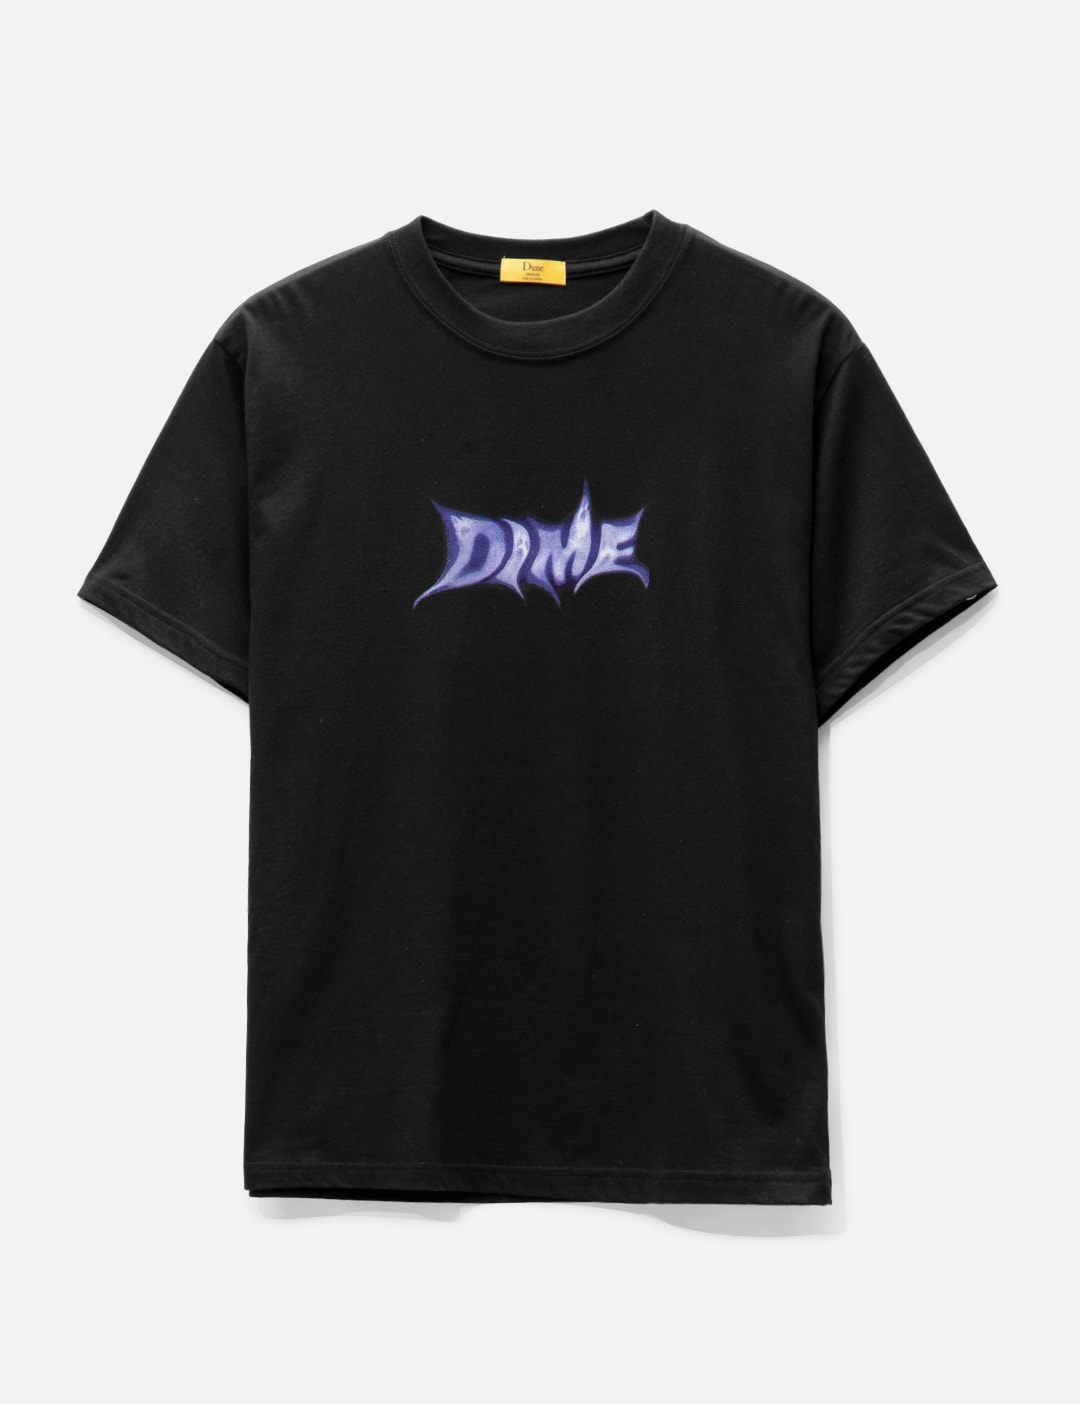 Dime - Ghostly Font T-Shirt | HBX - Globally Curated Fashion and ...